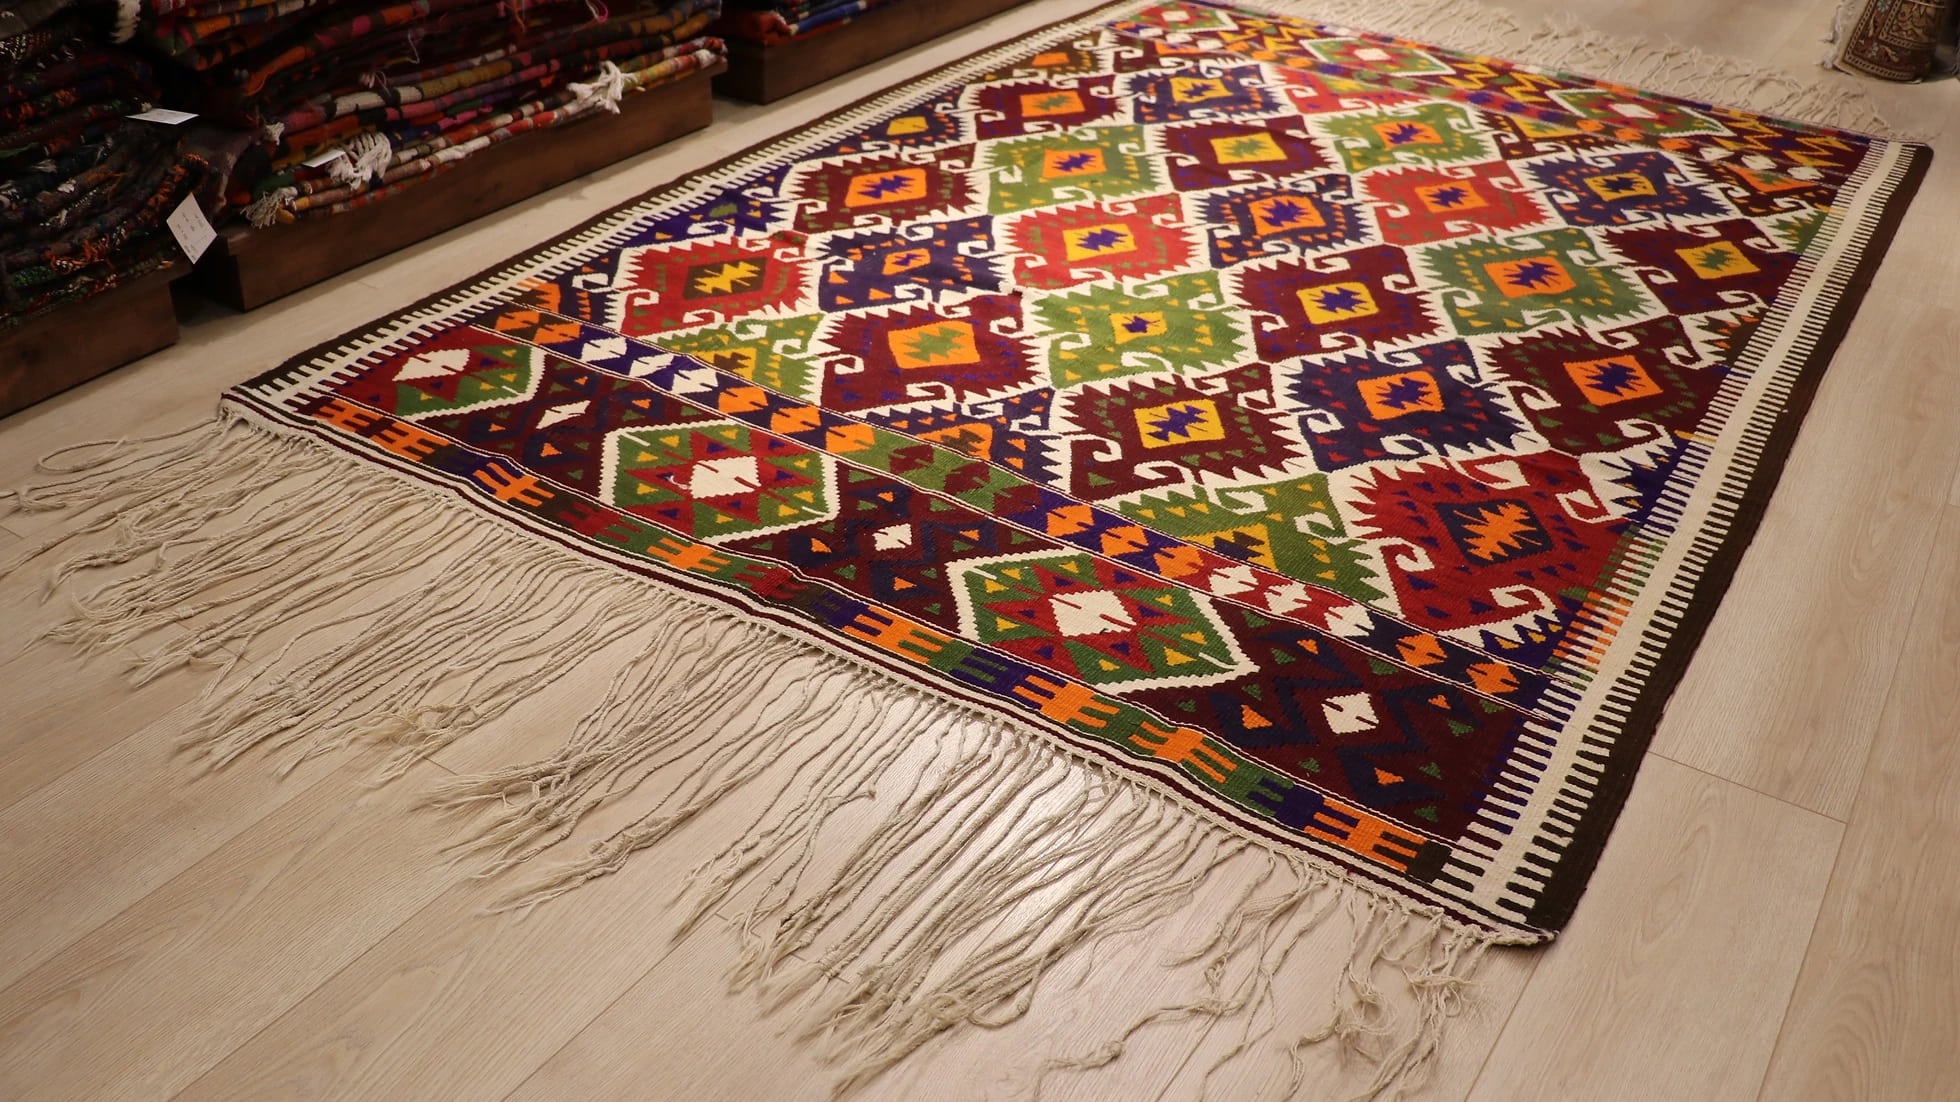 a luxury nomadic handwoven vintage Turkish kilim rug from Antalya in rustic earth tones and tribal motifs